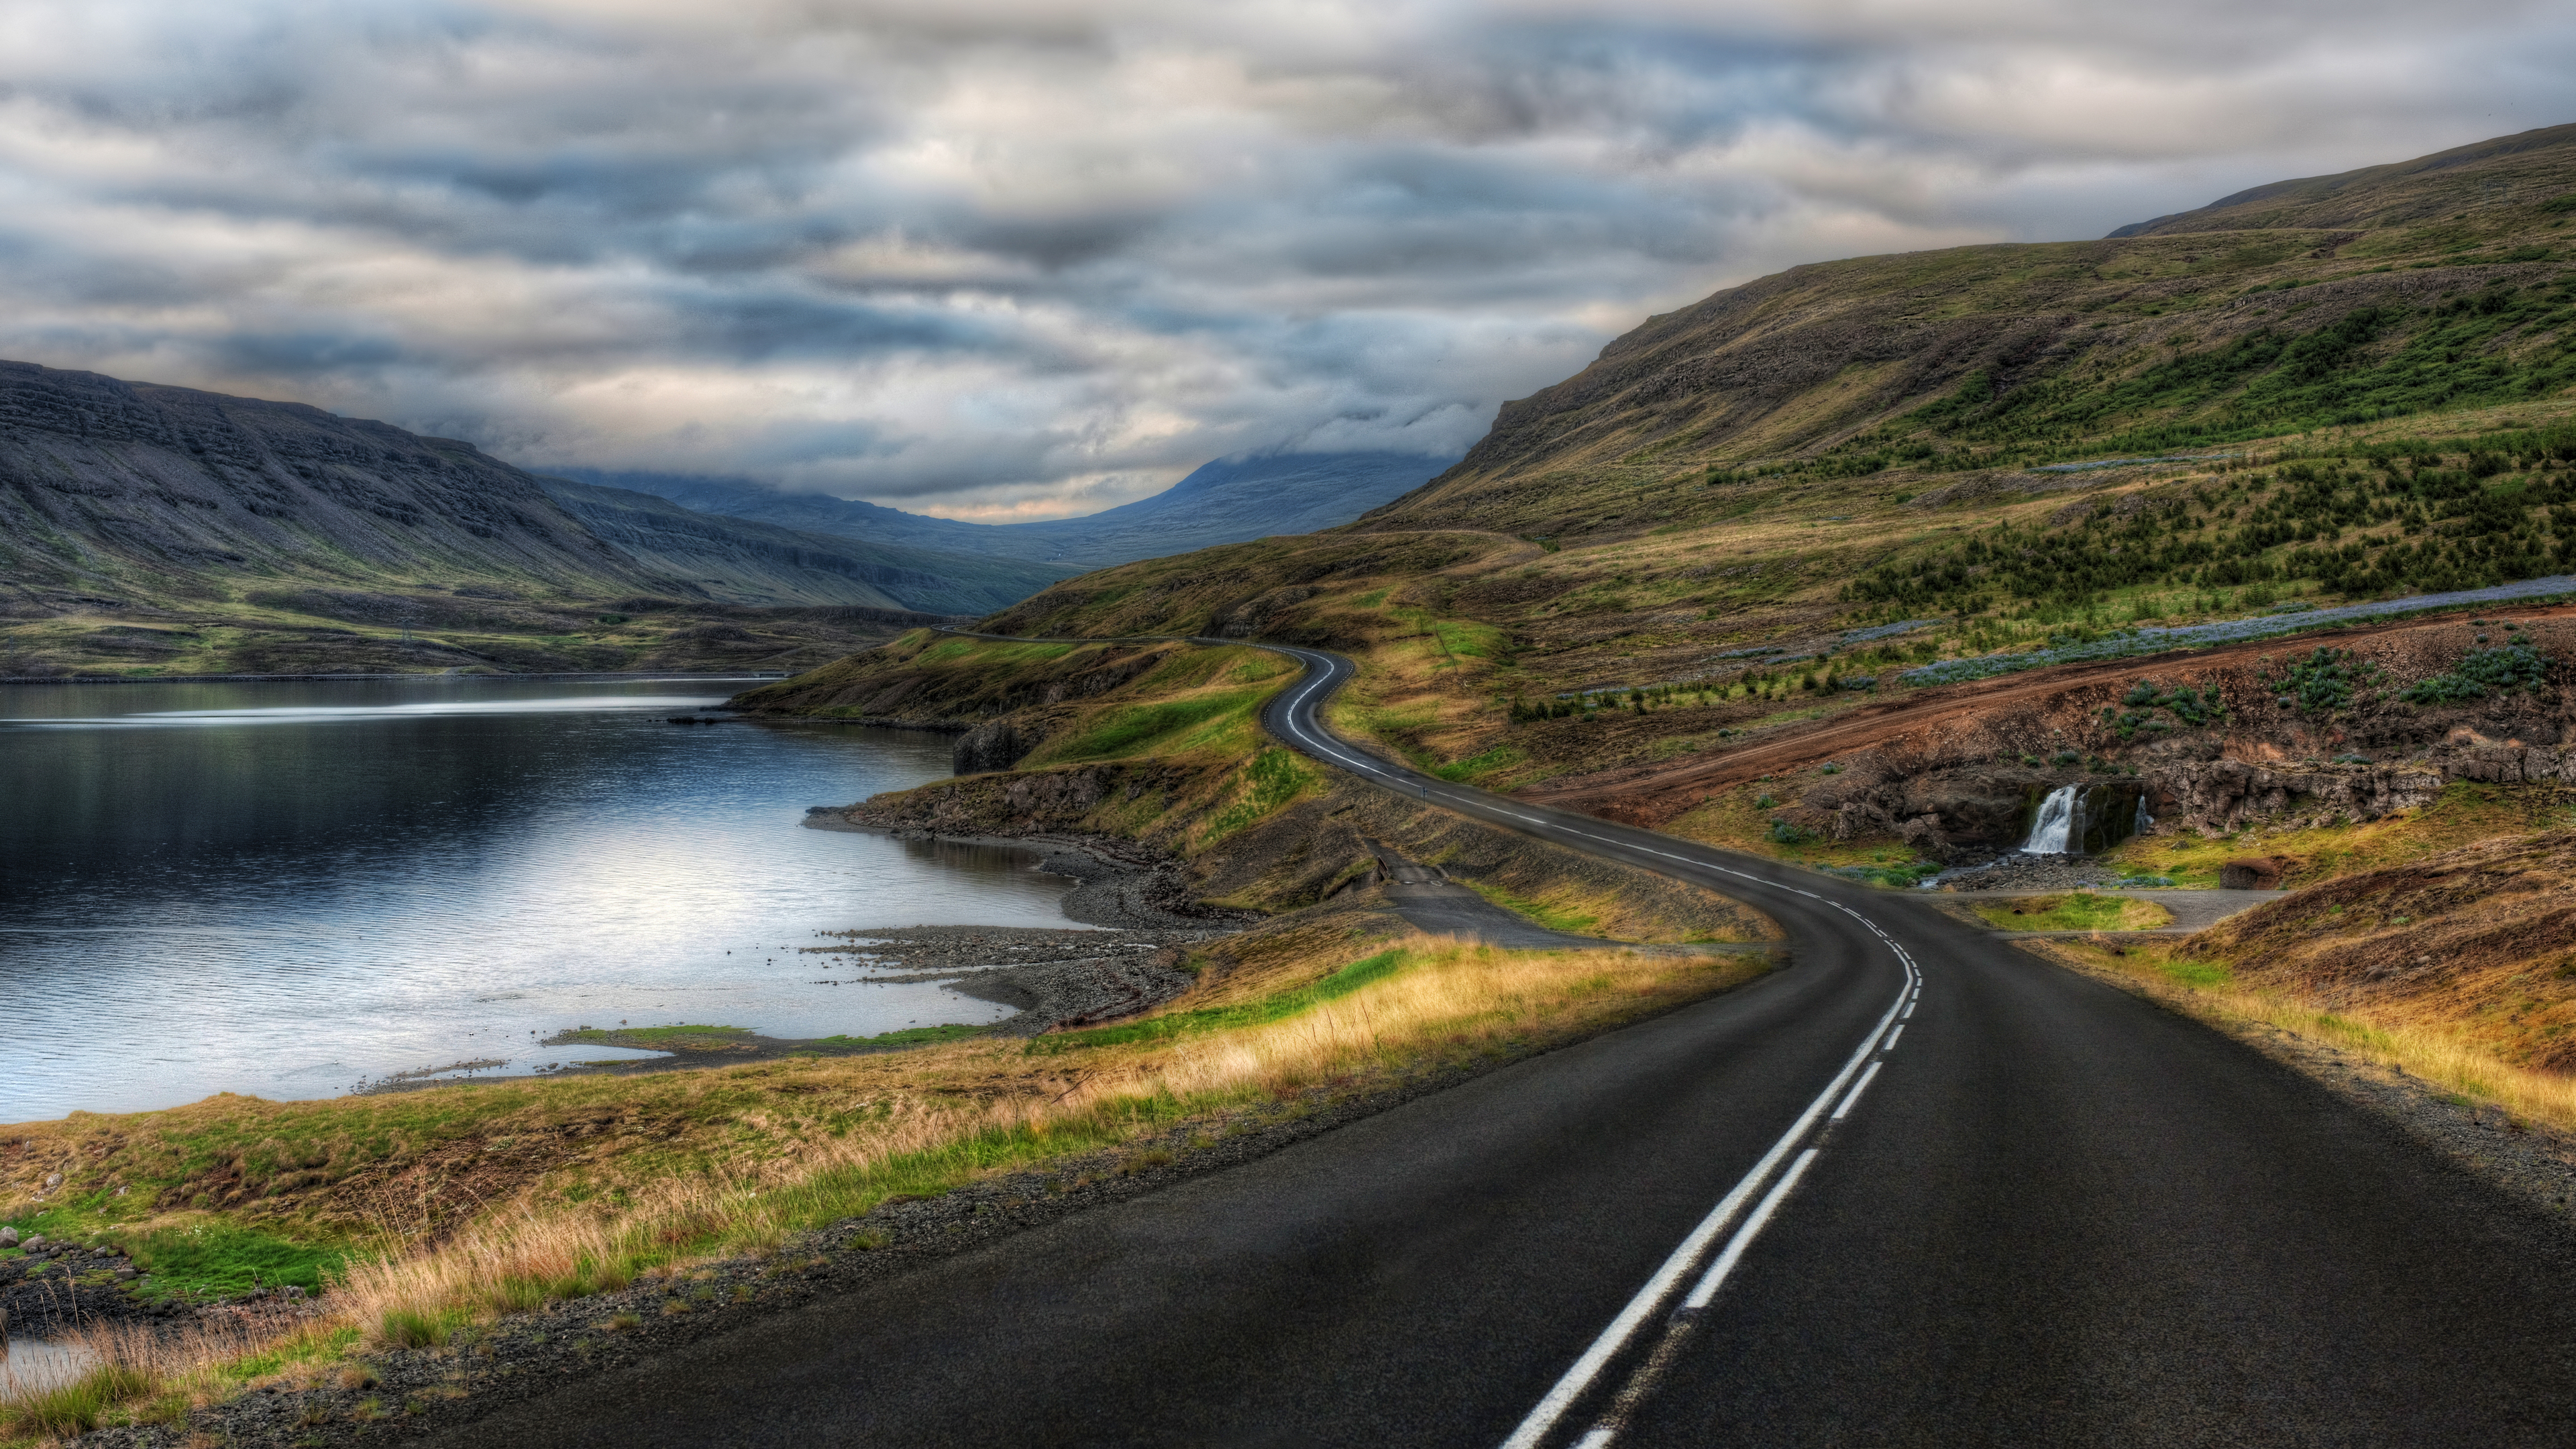 General 3840x2160 landscape Iceland Trey Ratcliff photography nature road mountains water hills grass clouds HDR